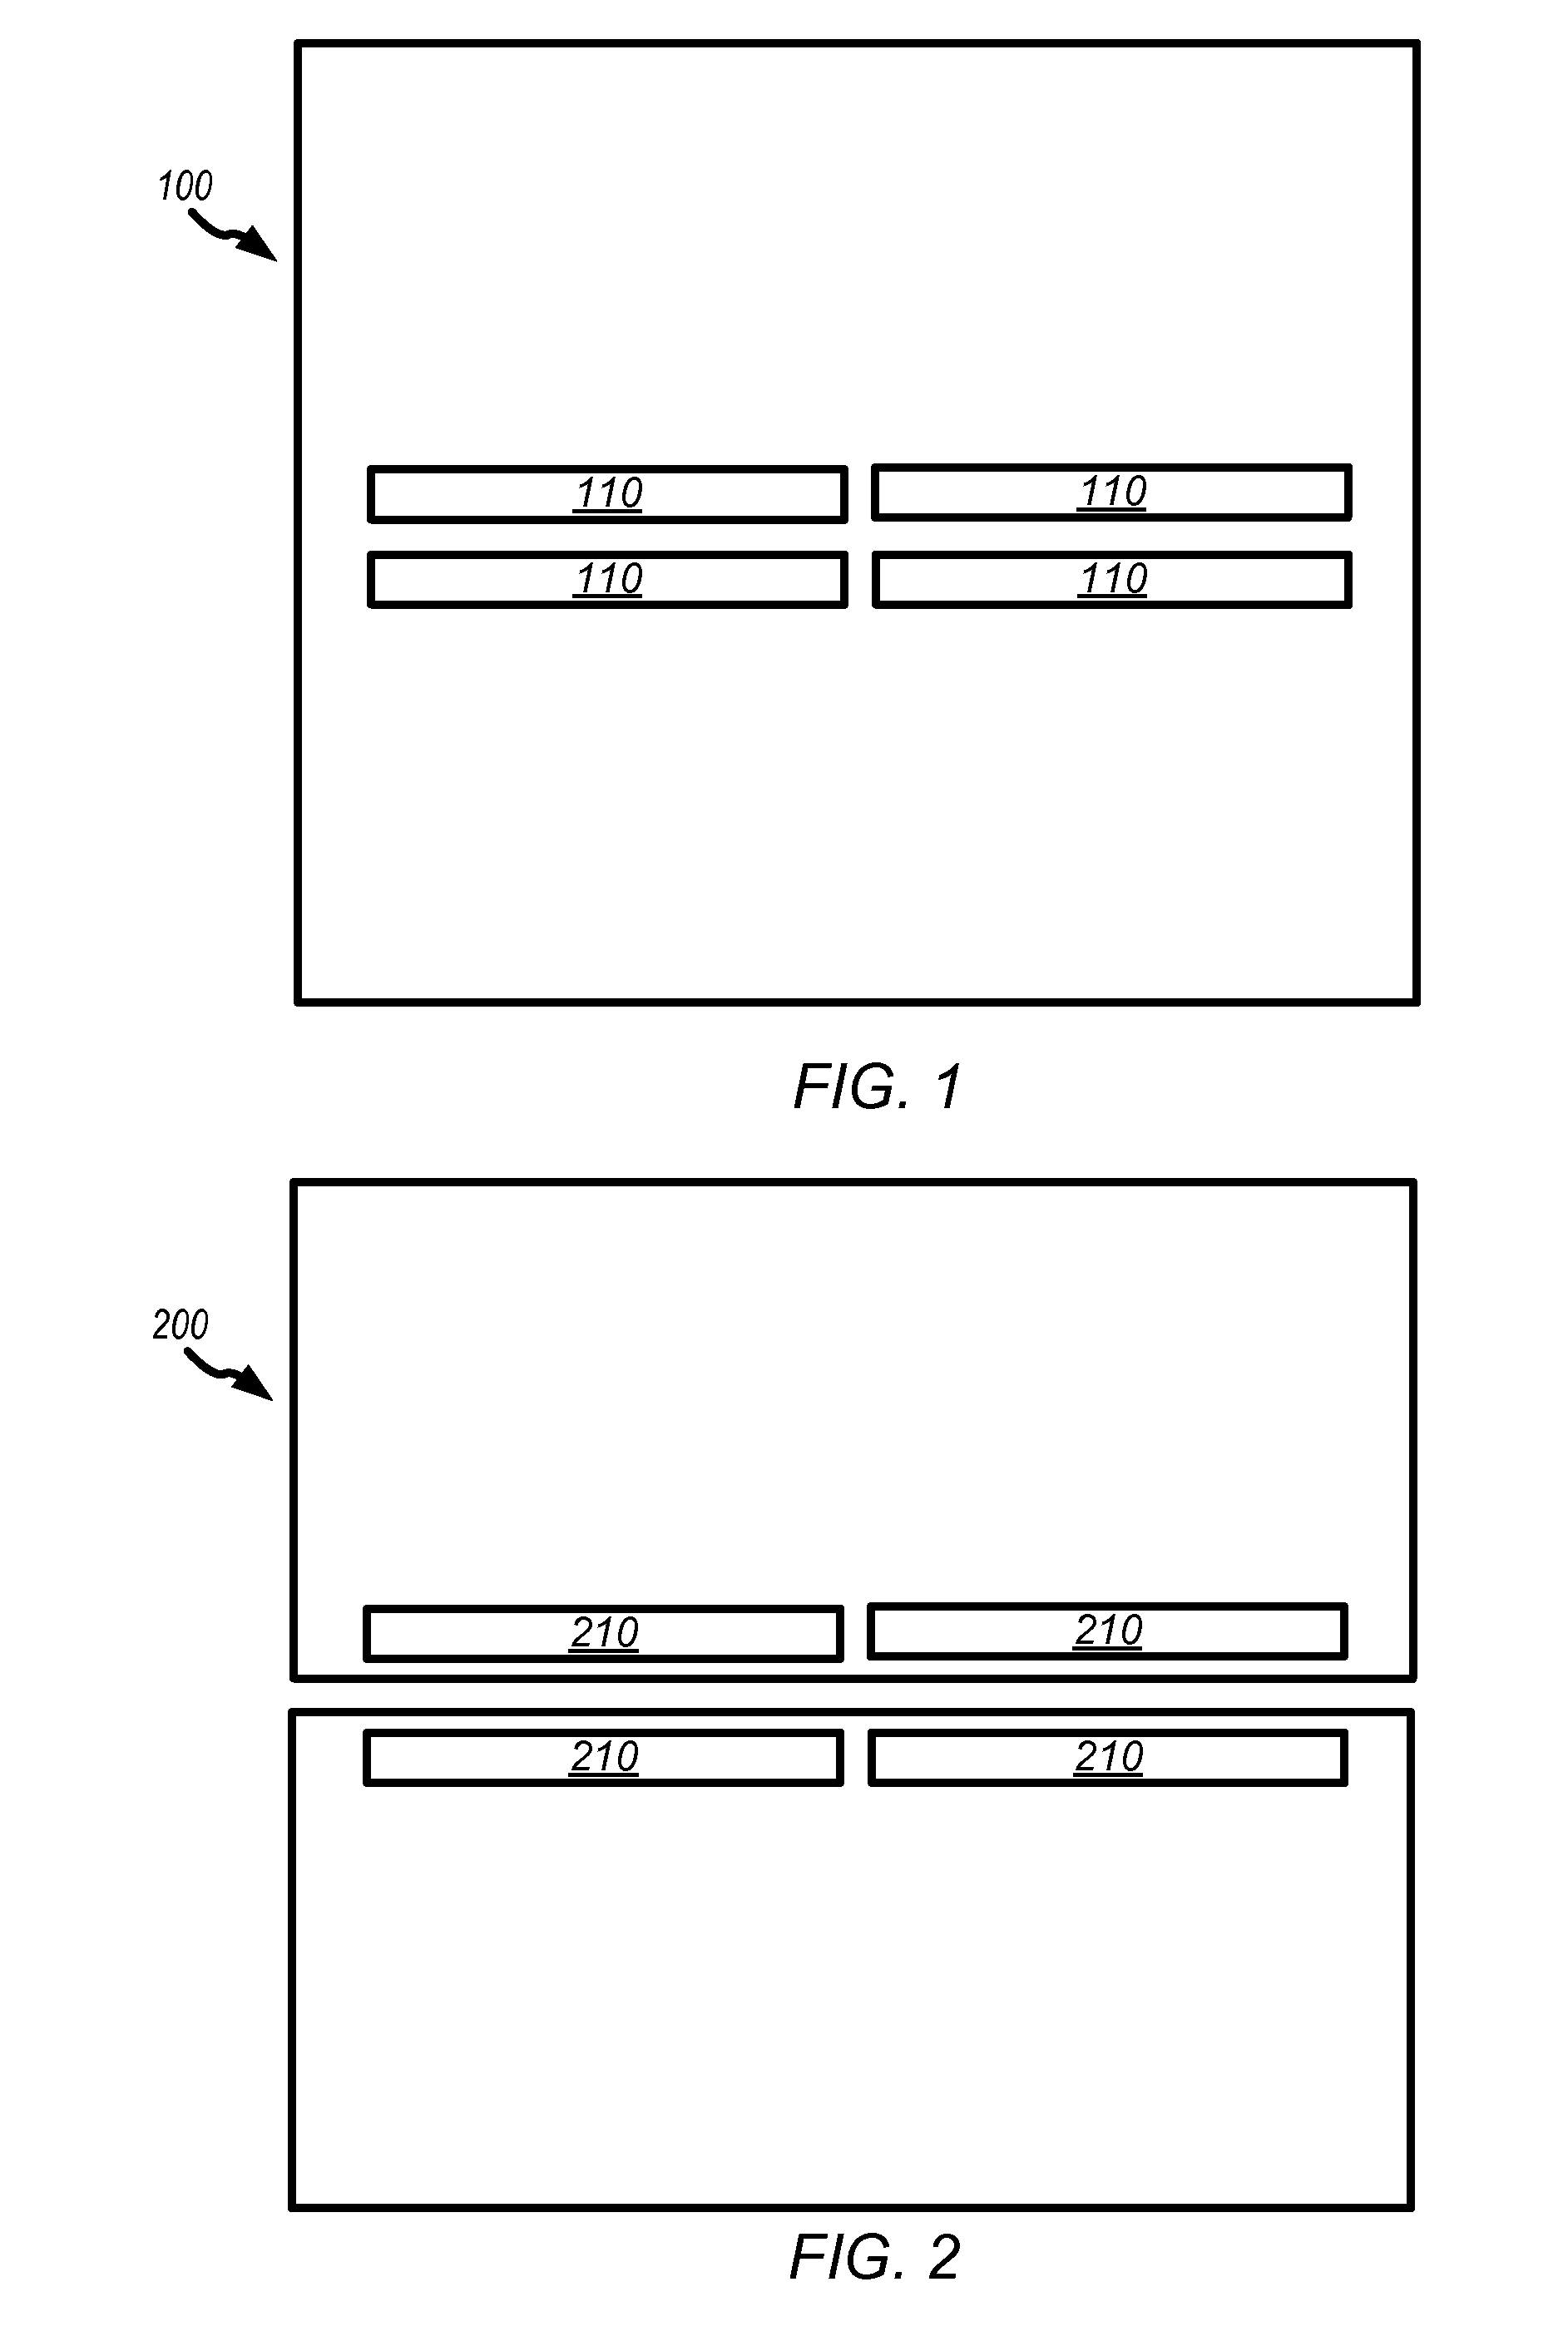 Reconfigured wide I/O memory modules and package architectures using same